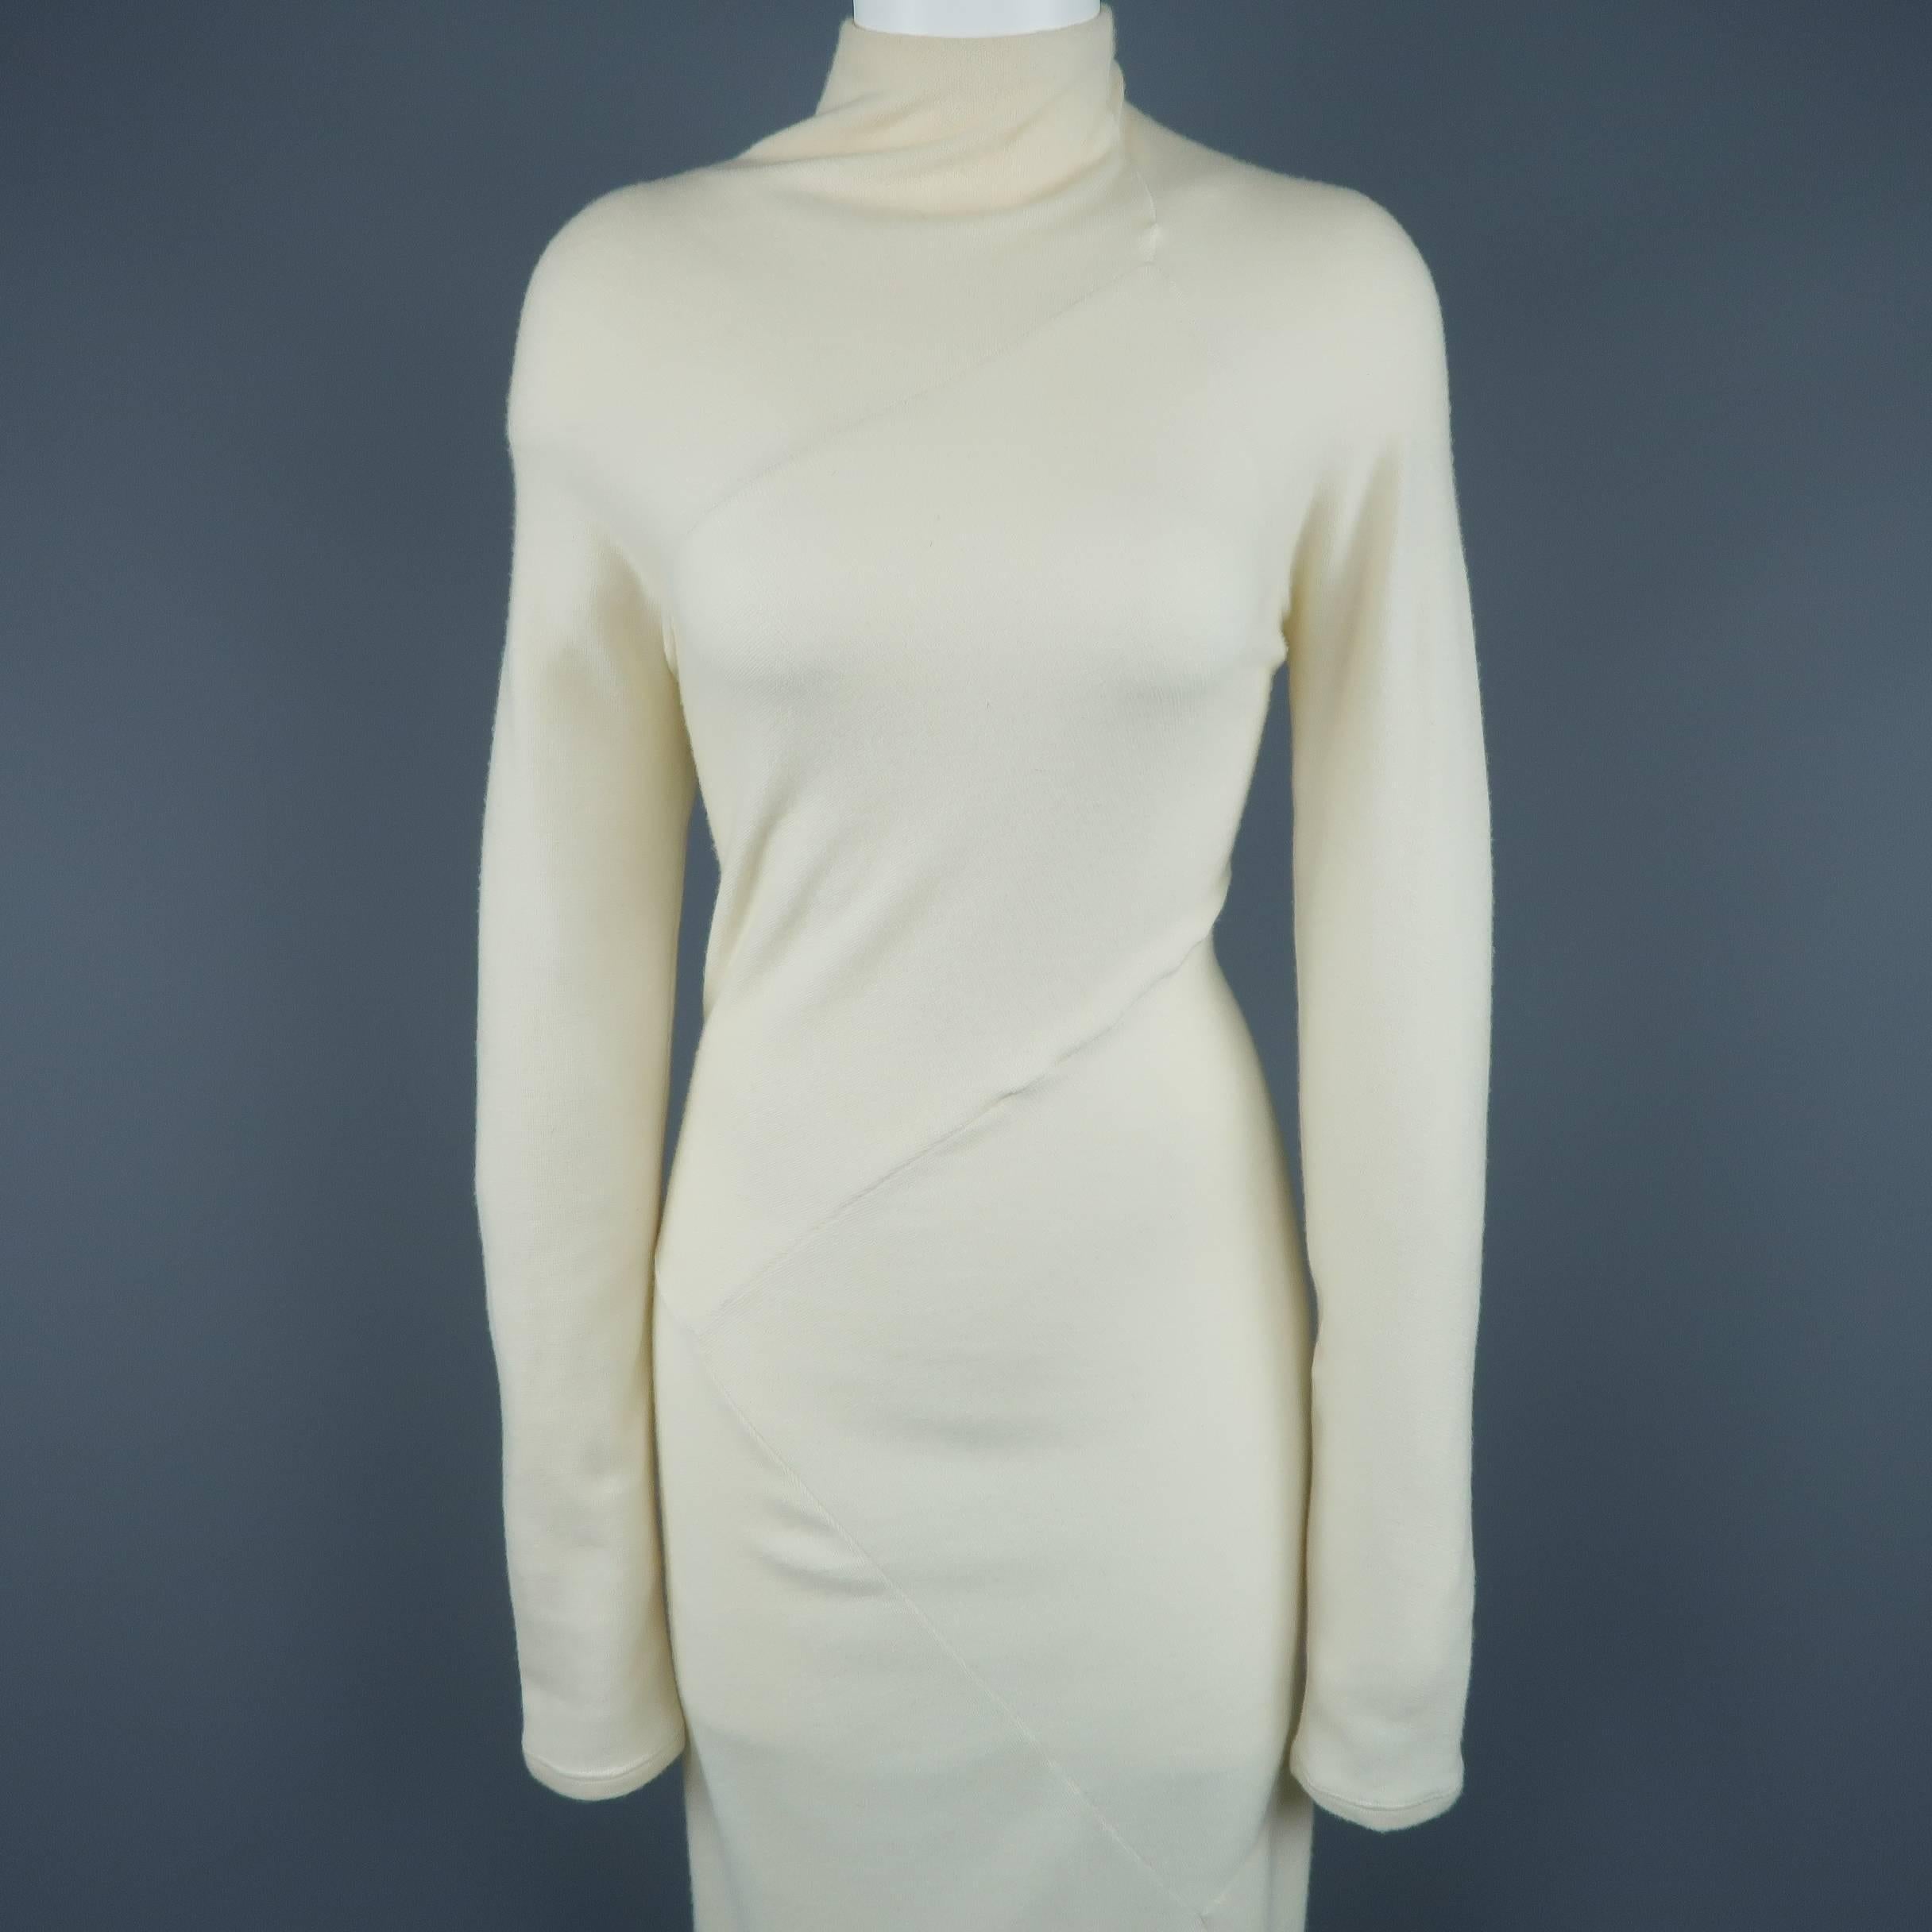 DONNA KARAN sweater midi dress comes in creamy beige stretch cashmere with a mock neck long sleeves and diagonal patchwork seam construction. Made in Italy.
 
Good Pre-Owned Condition.
Marked: (no size)
 
Measurements:
 
Shoulder: 15 in.
Bust: 35